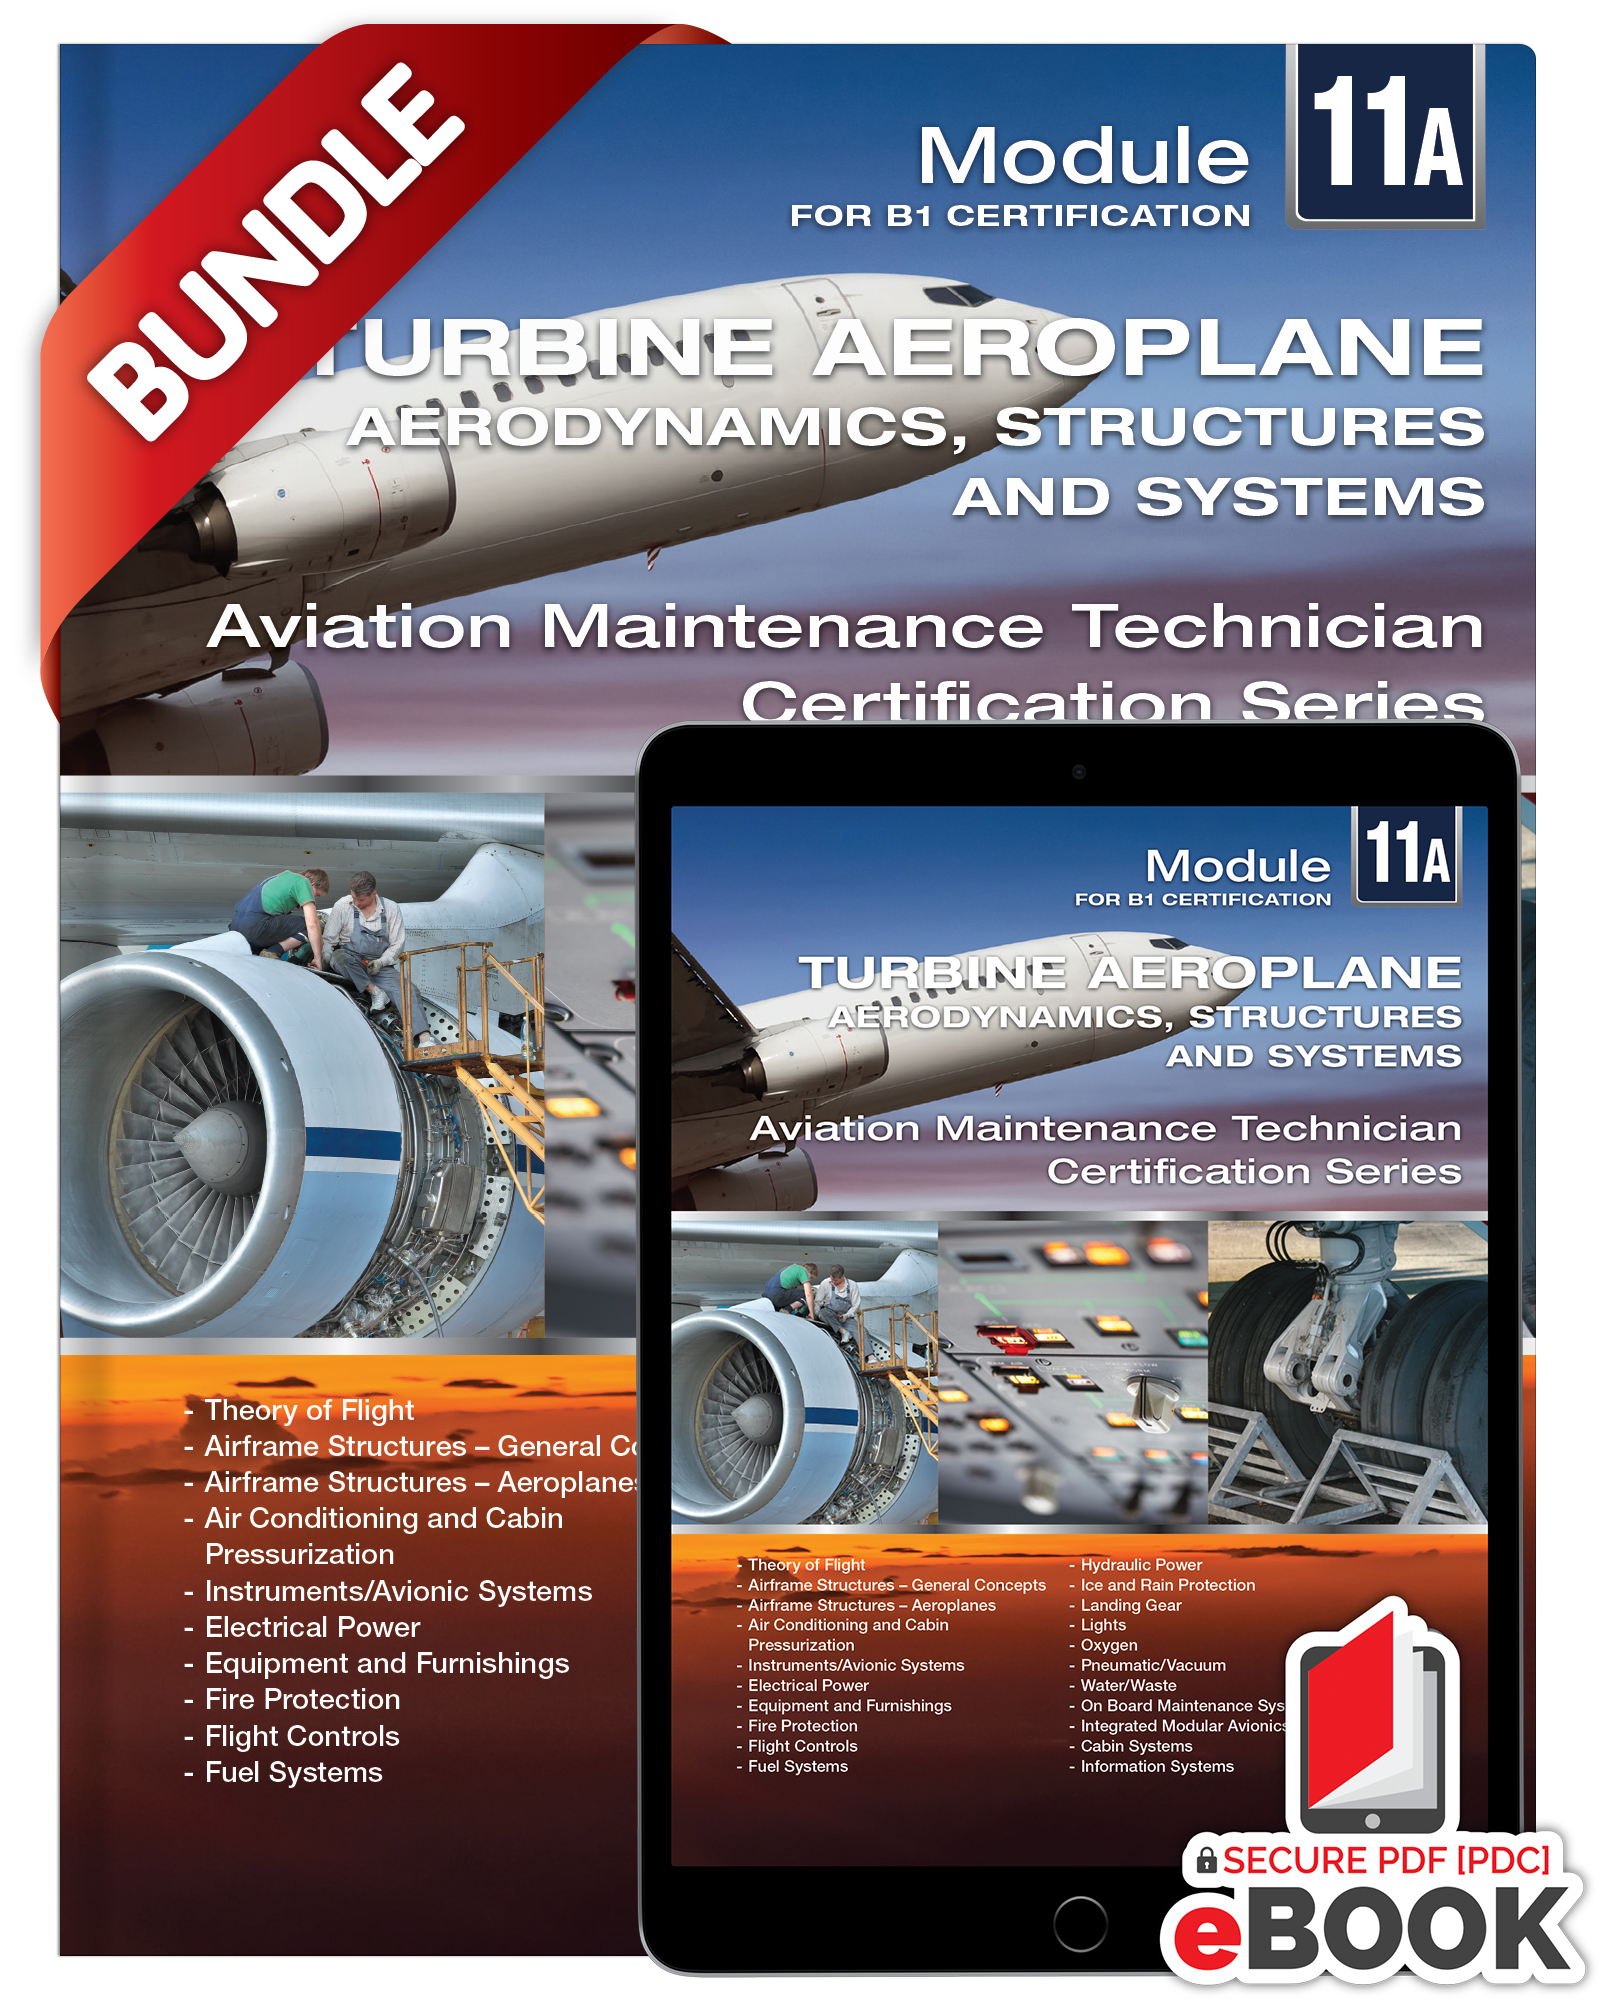 Turbine Aeroplane Structures and Systems: Module 11A (B1) - Bundle